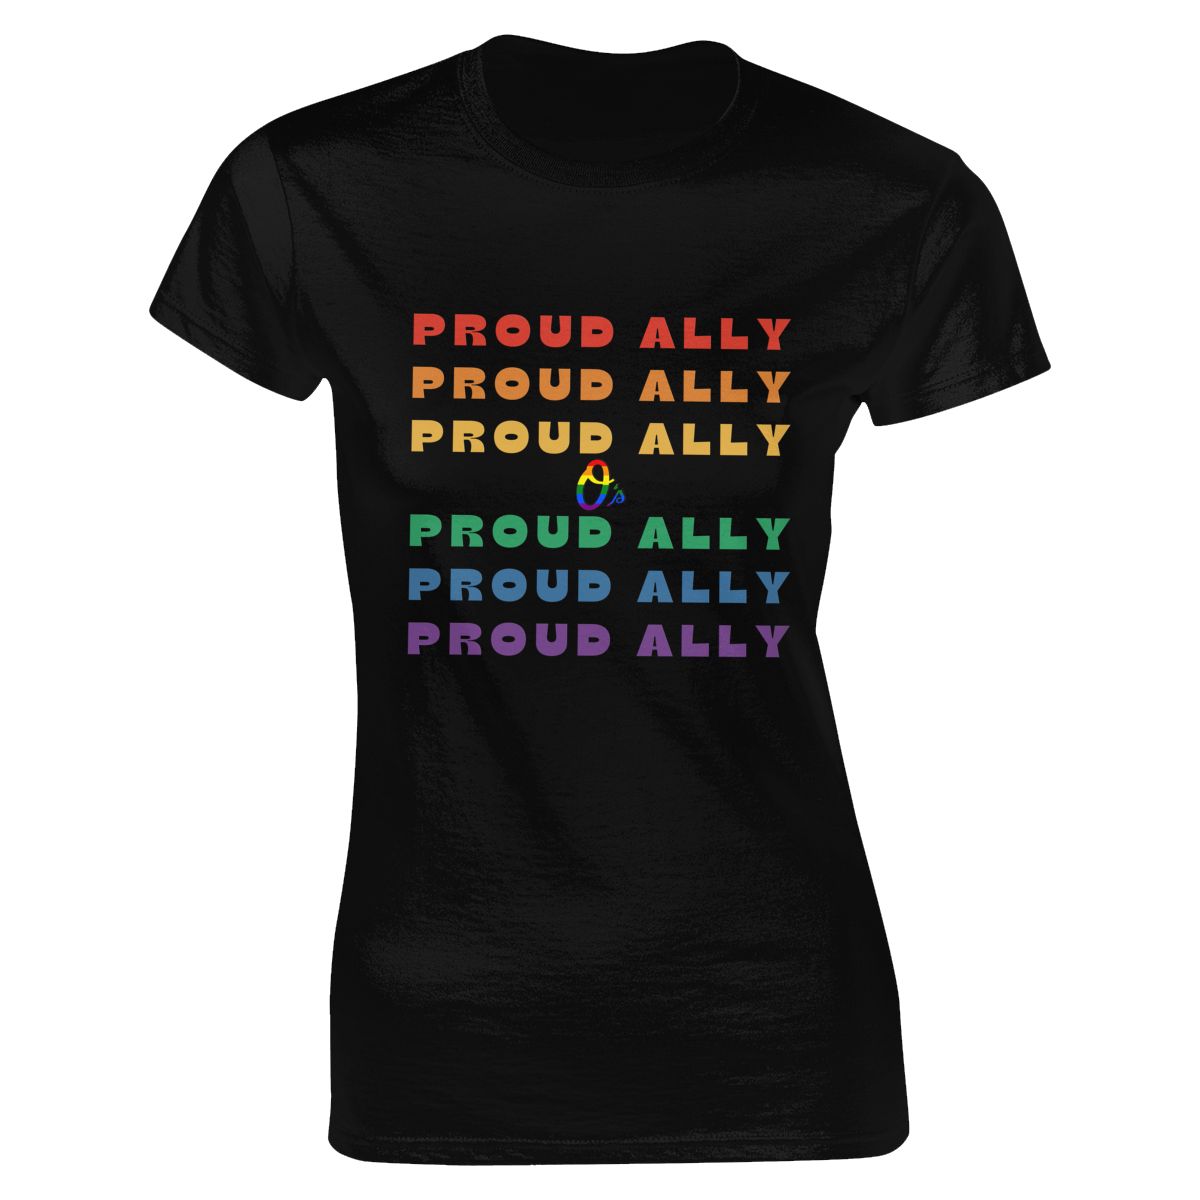 Baltimore Orioles Proud Ally Women's Classic-Fit T-Shirt